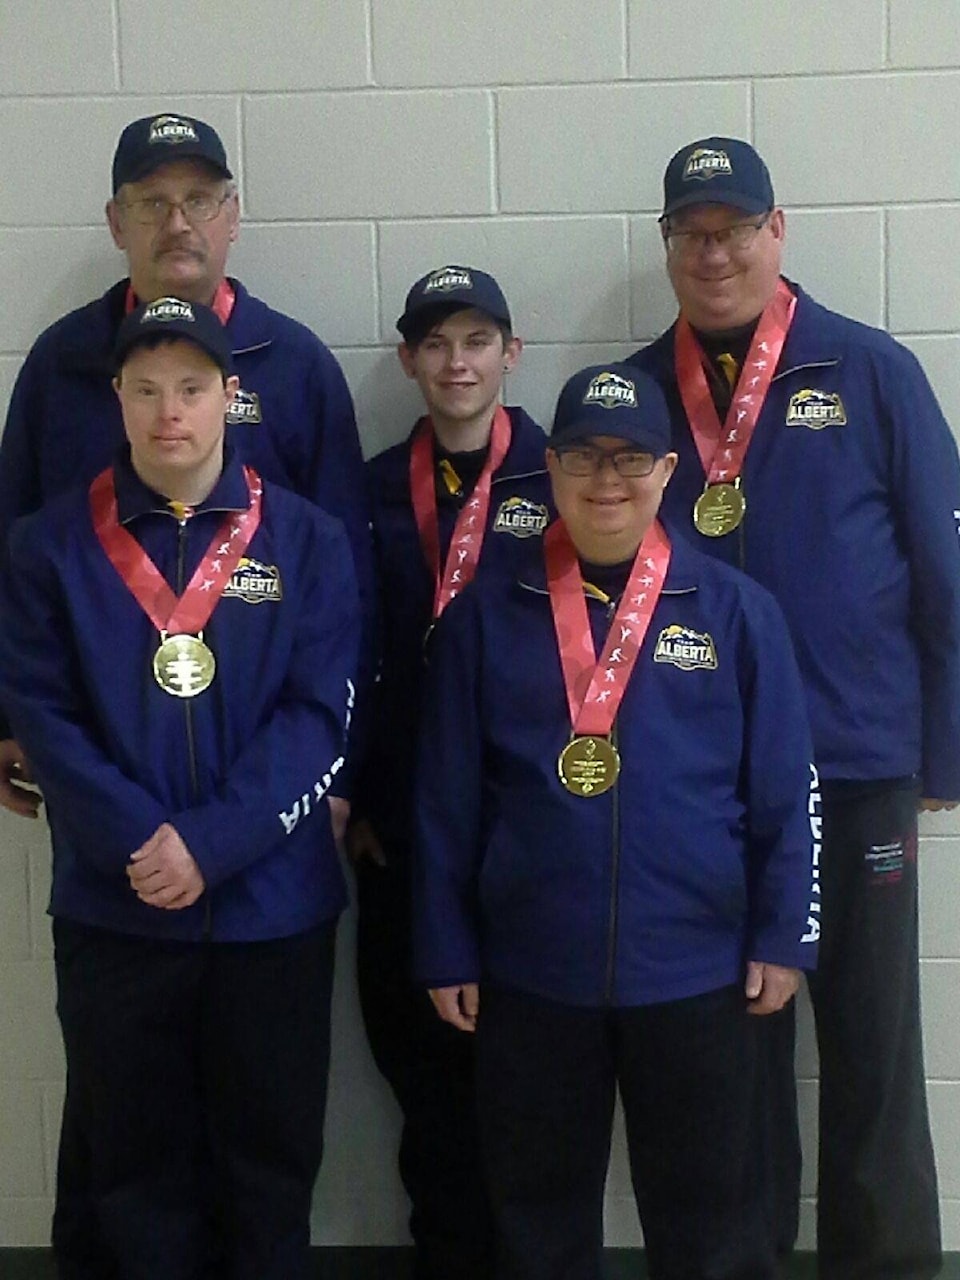 20910535_web1_200312-WPF-Wetaskiwin-special-olympics-brings-home-medals_1